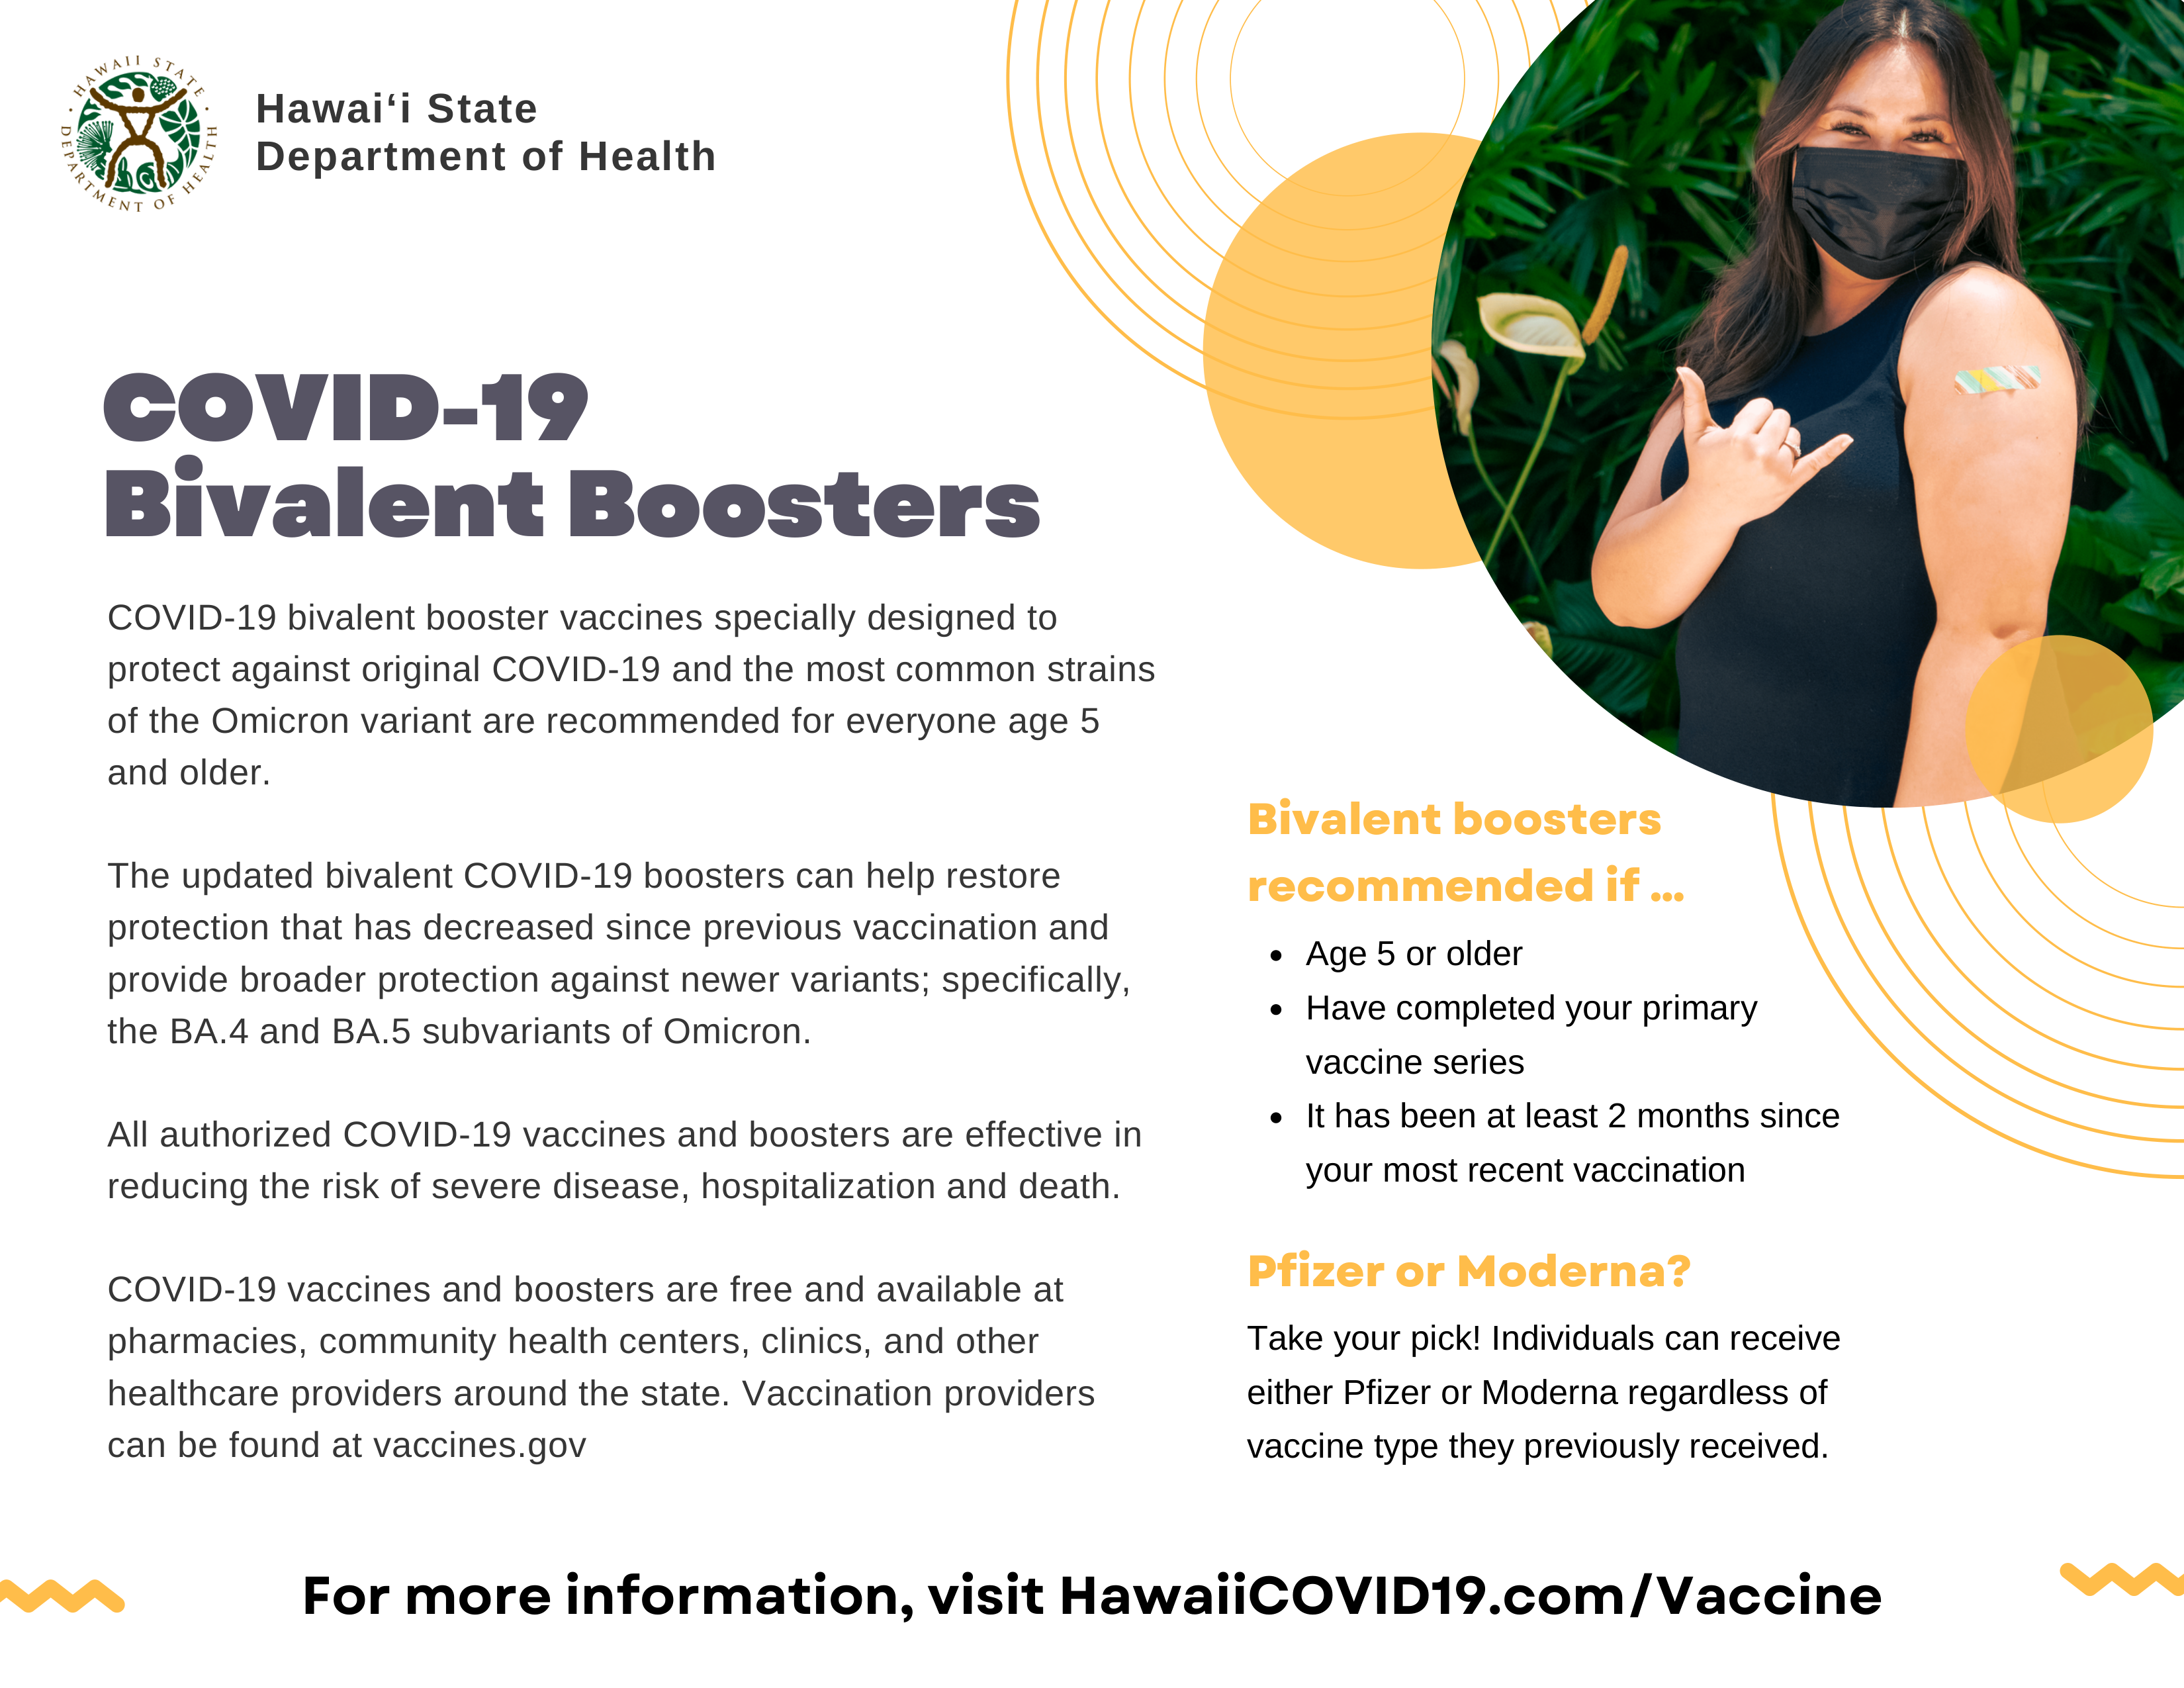 factsheet called COVID-19 bivalent boosters with a woman showing her arm where she received a vaccine